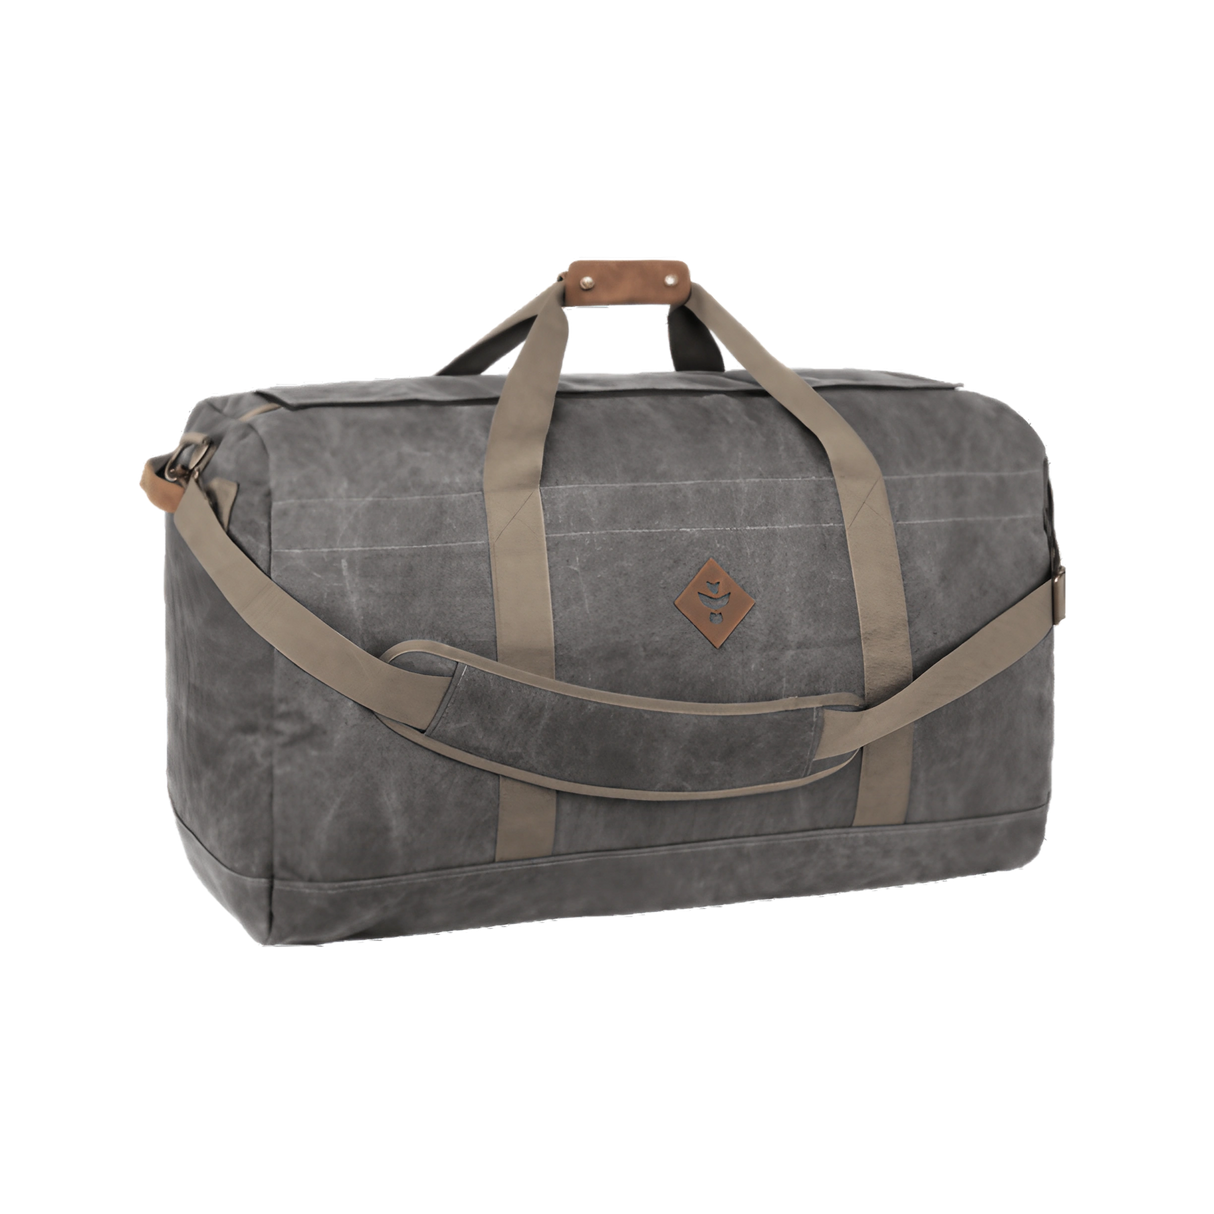 Revelry Supply Continental medium-sized rubber duffel bag in Ash, front view on a white background